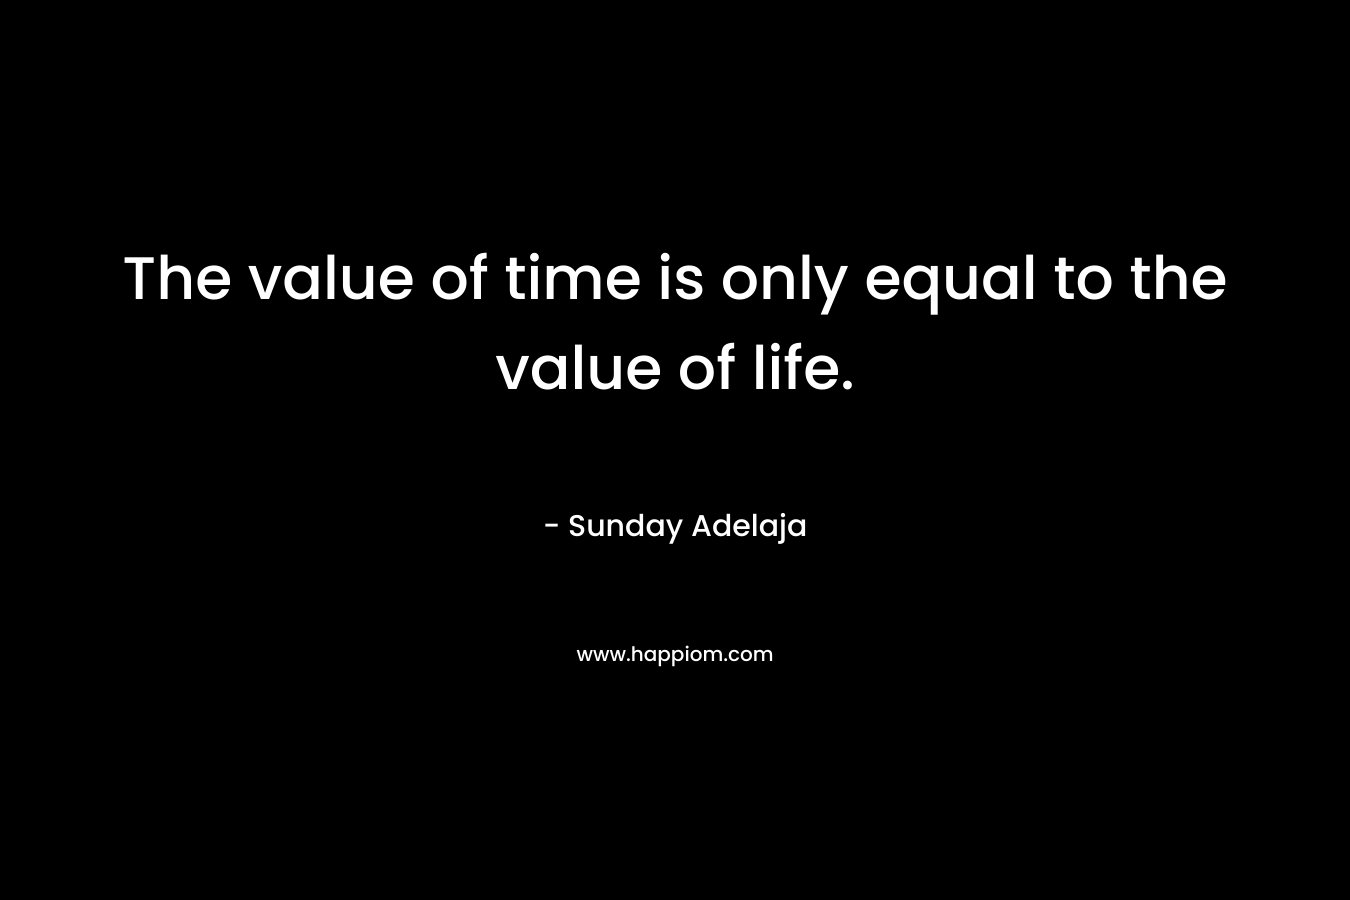 The value of time is only equal to the value of life.